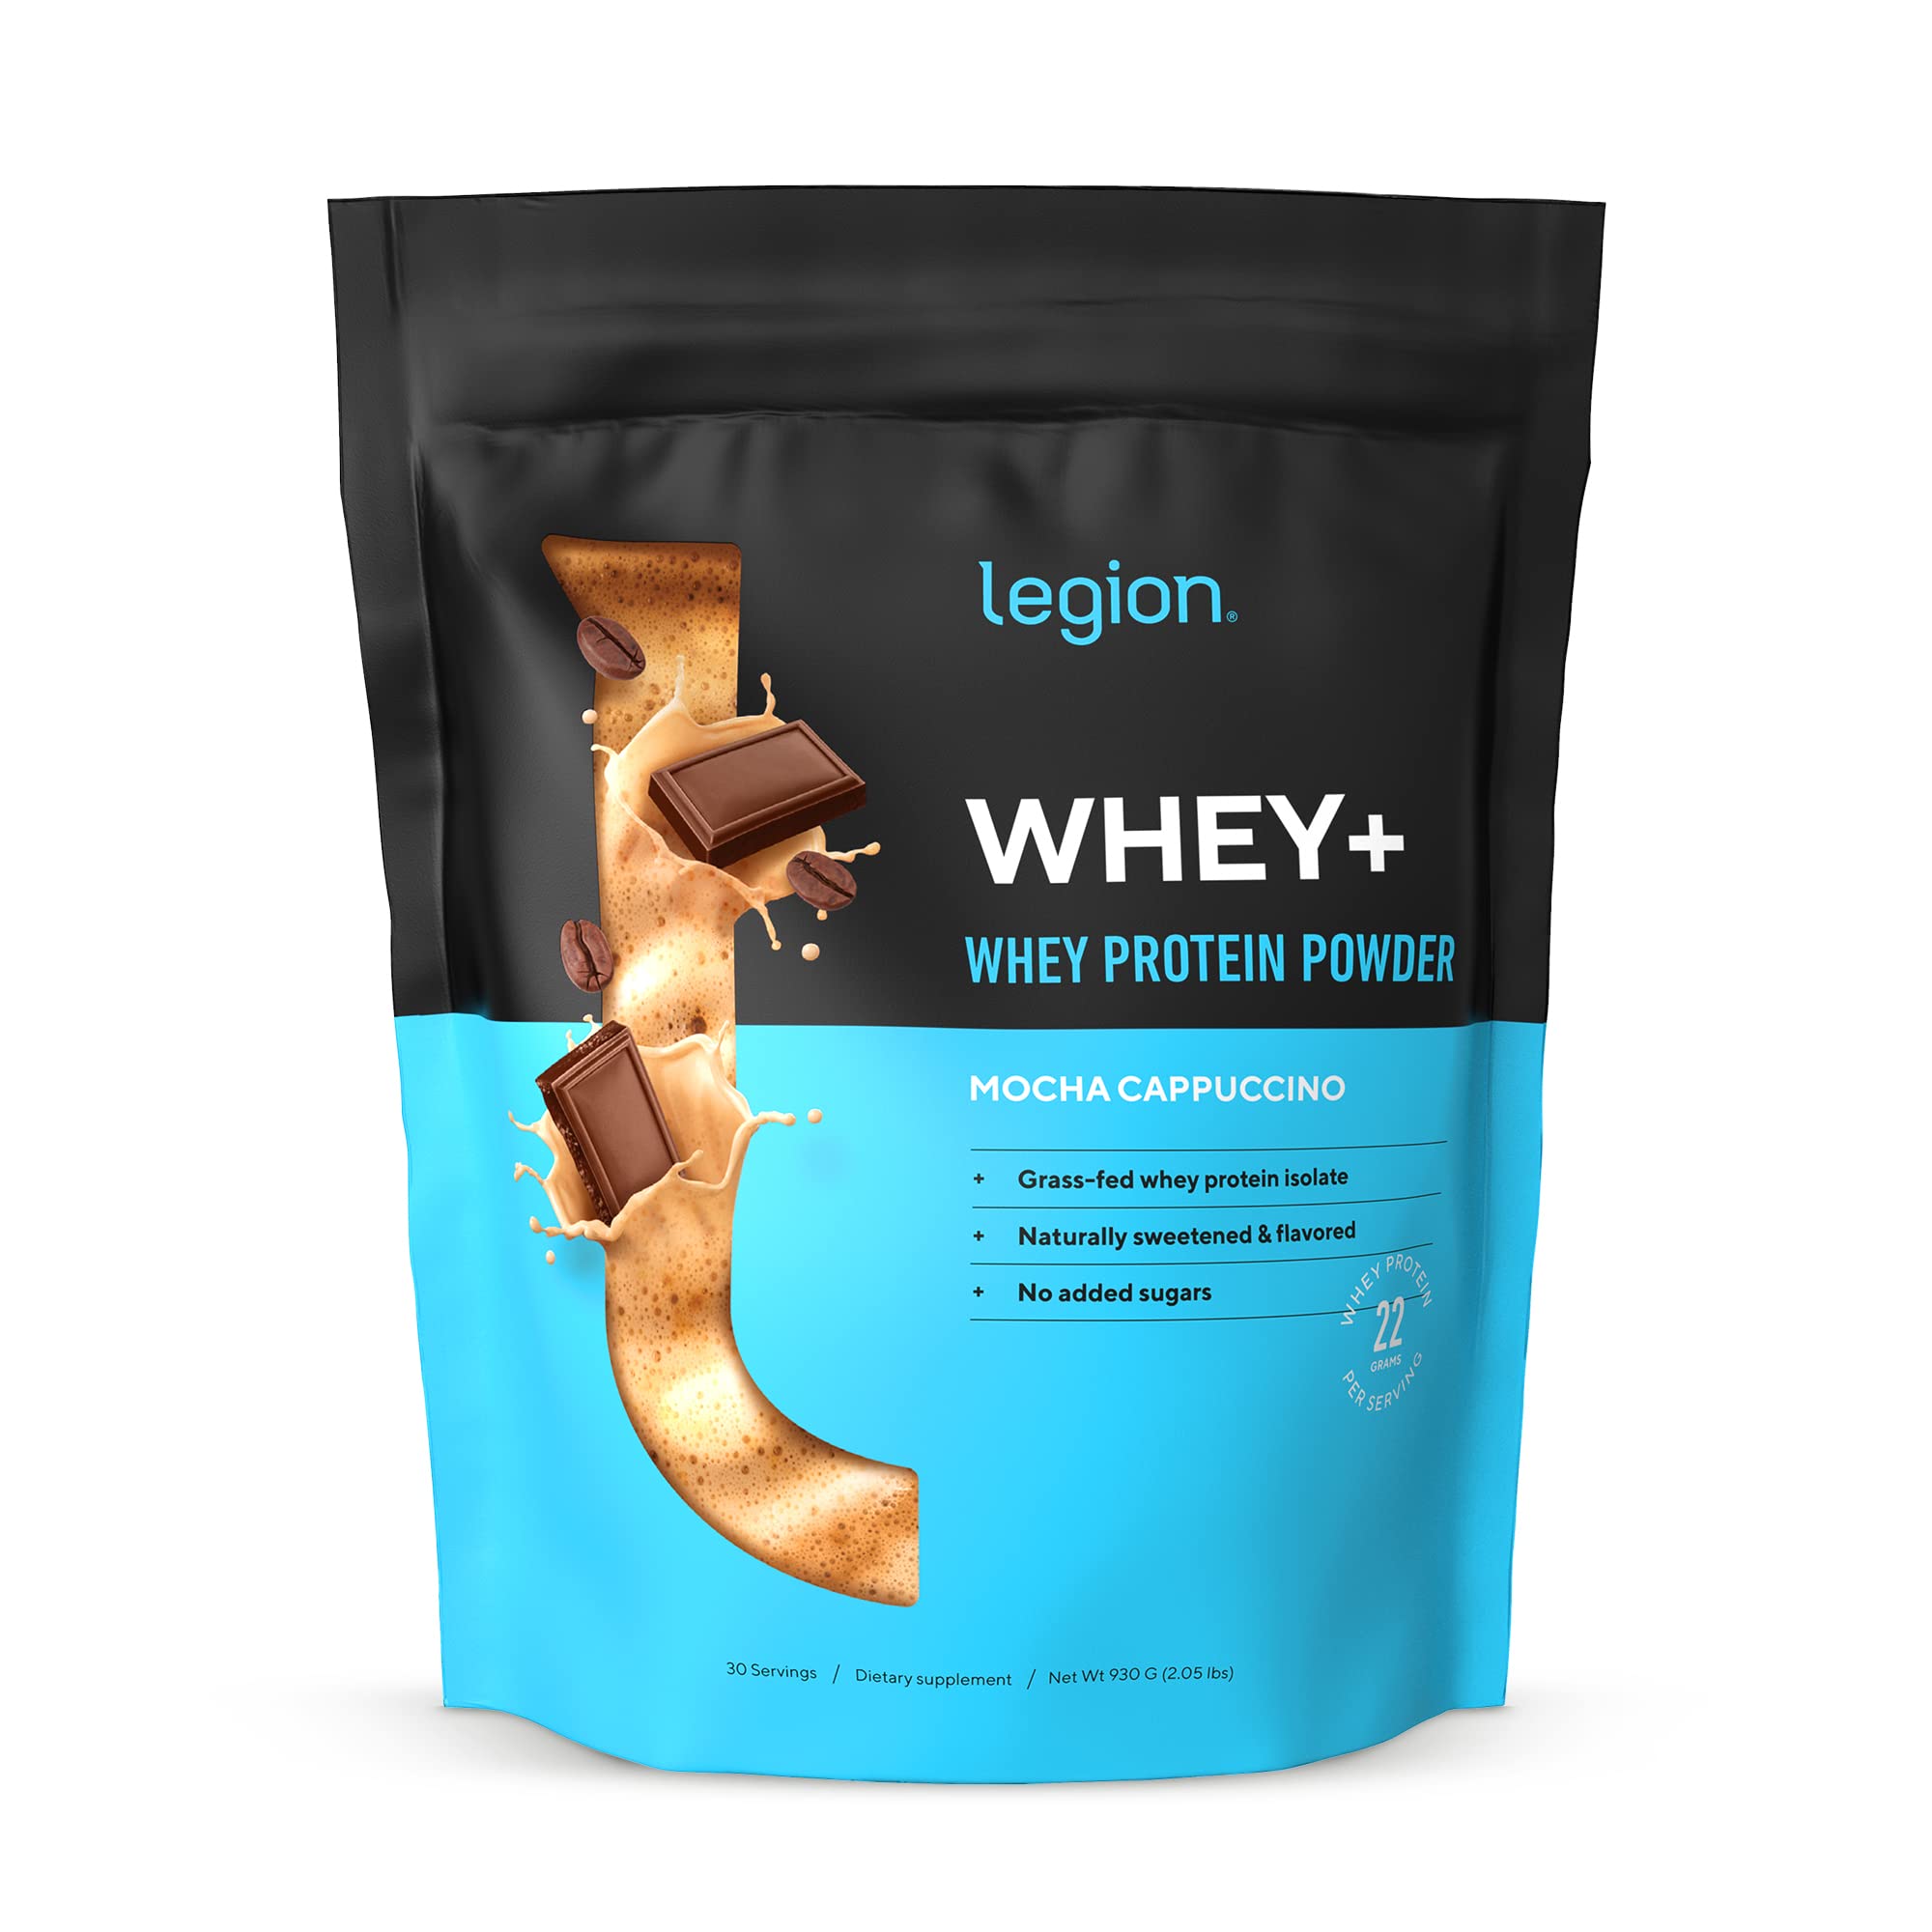 LEgION Whey Whey Isolate Protein Powder from grass Fed cows - Low carb, Low calorie, Non-gMO, Lactose Free, gluten Free, Sugar F